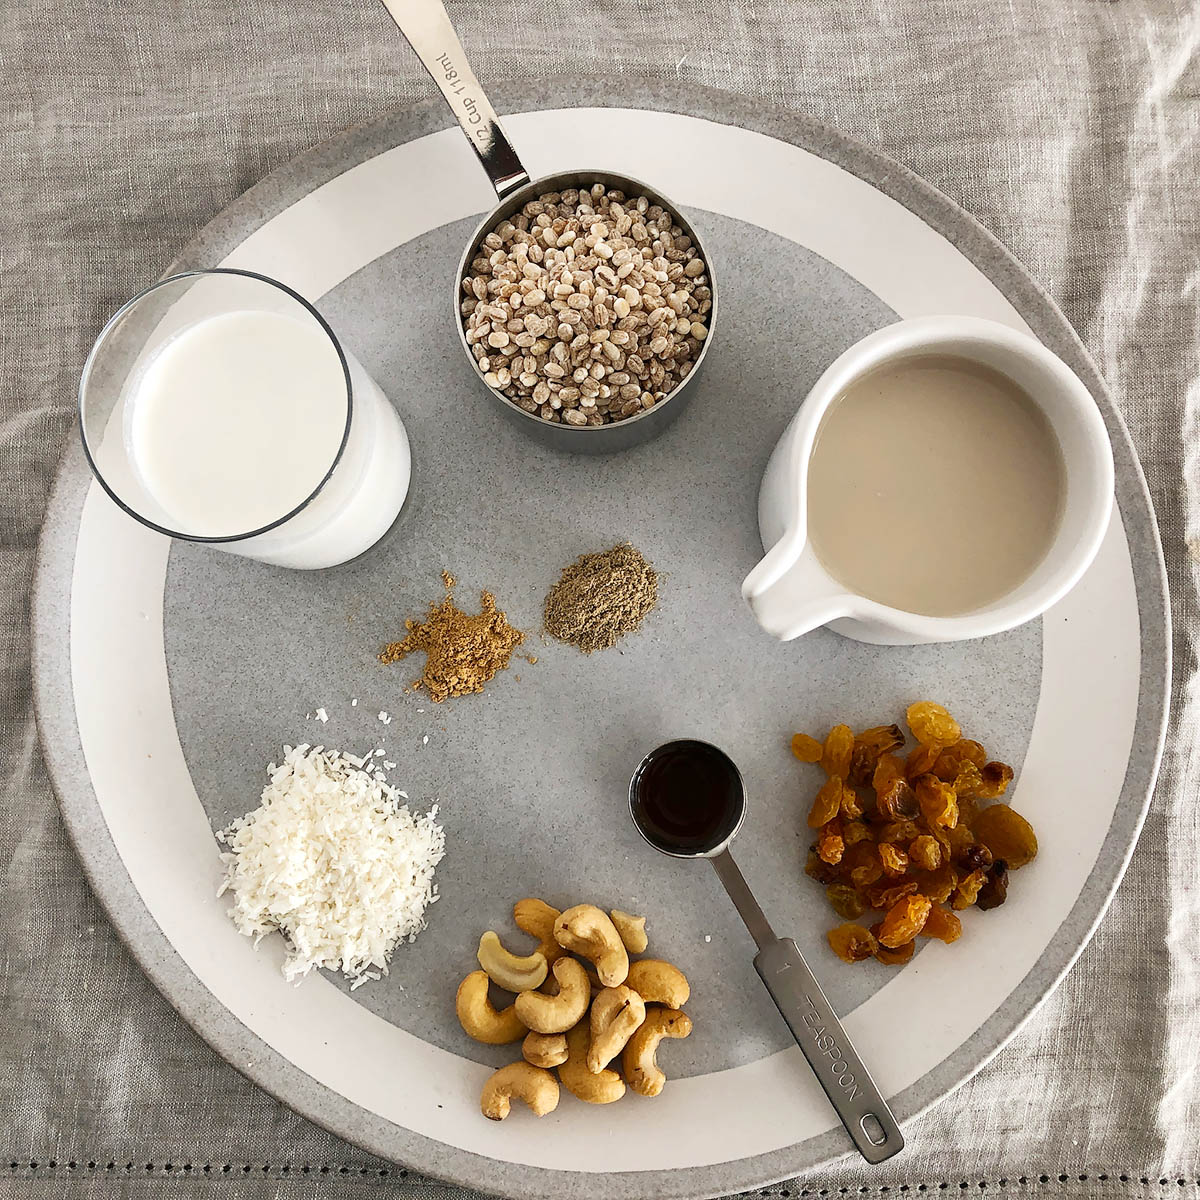 Ingredients for 1-Pot Barley Porridge: a measuring cup with pot barley, a vessel with cashew milk, a pile of raisins, a teaspoon of vanilla, cashews, shredded coconut, coconut milk, ginger, cardamom, all on a grey plate.